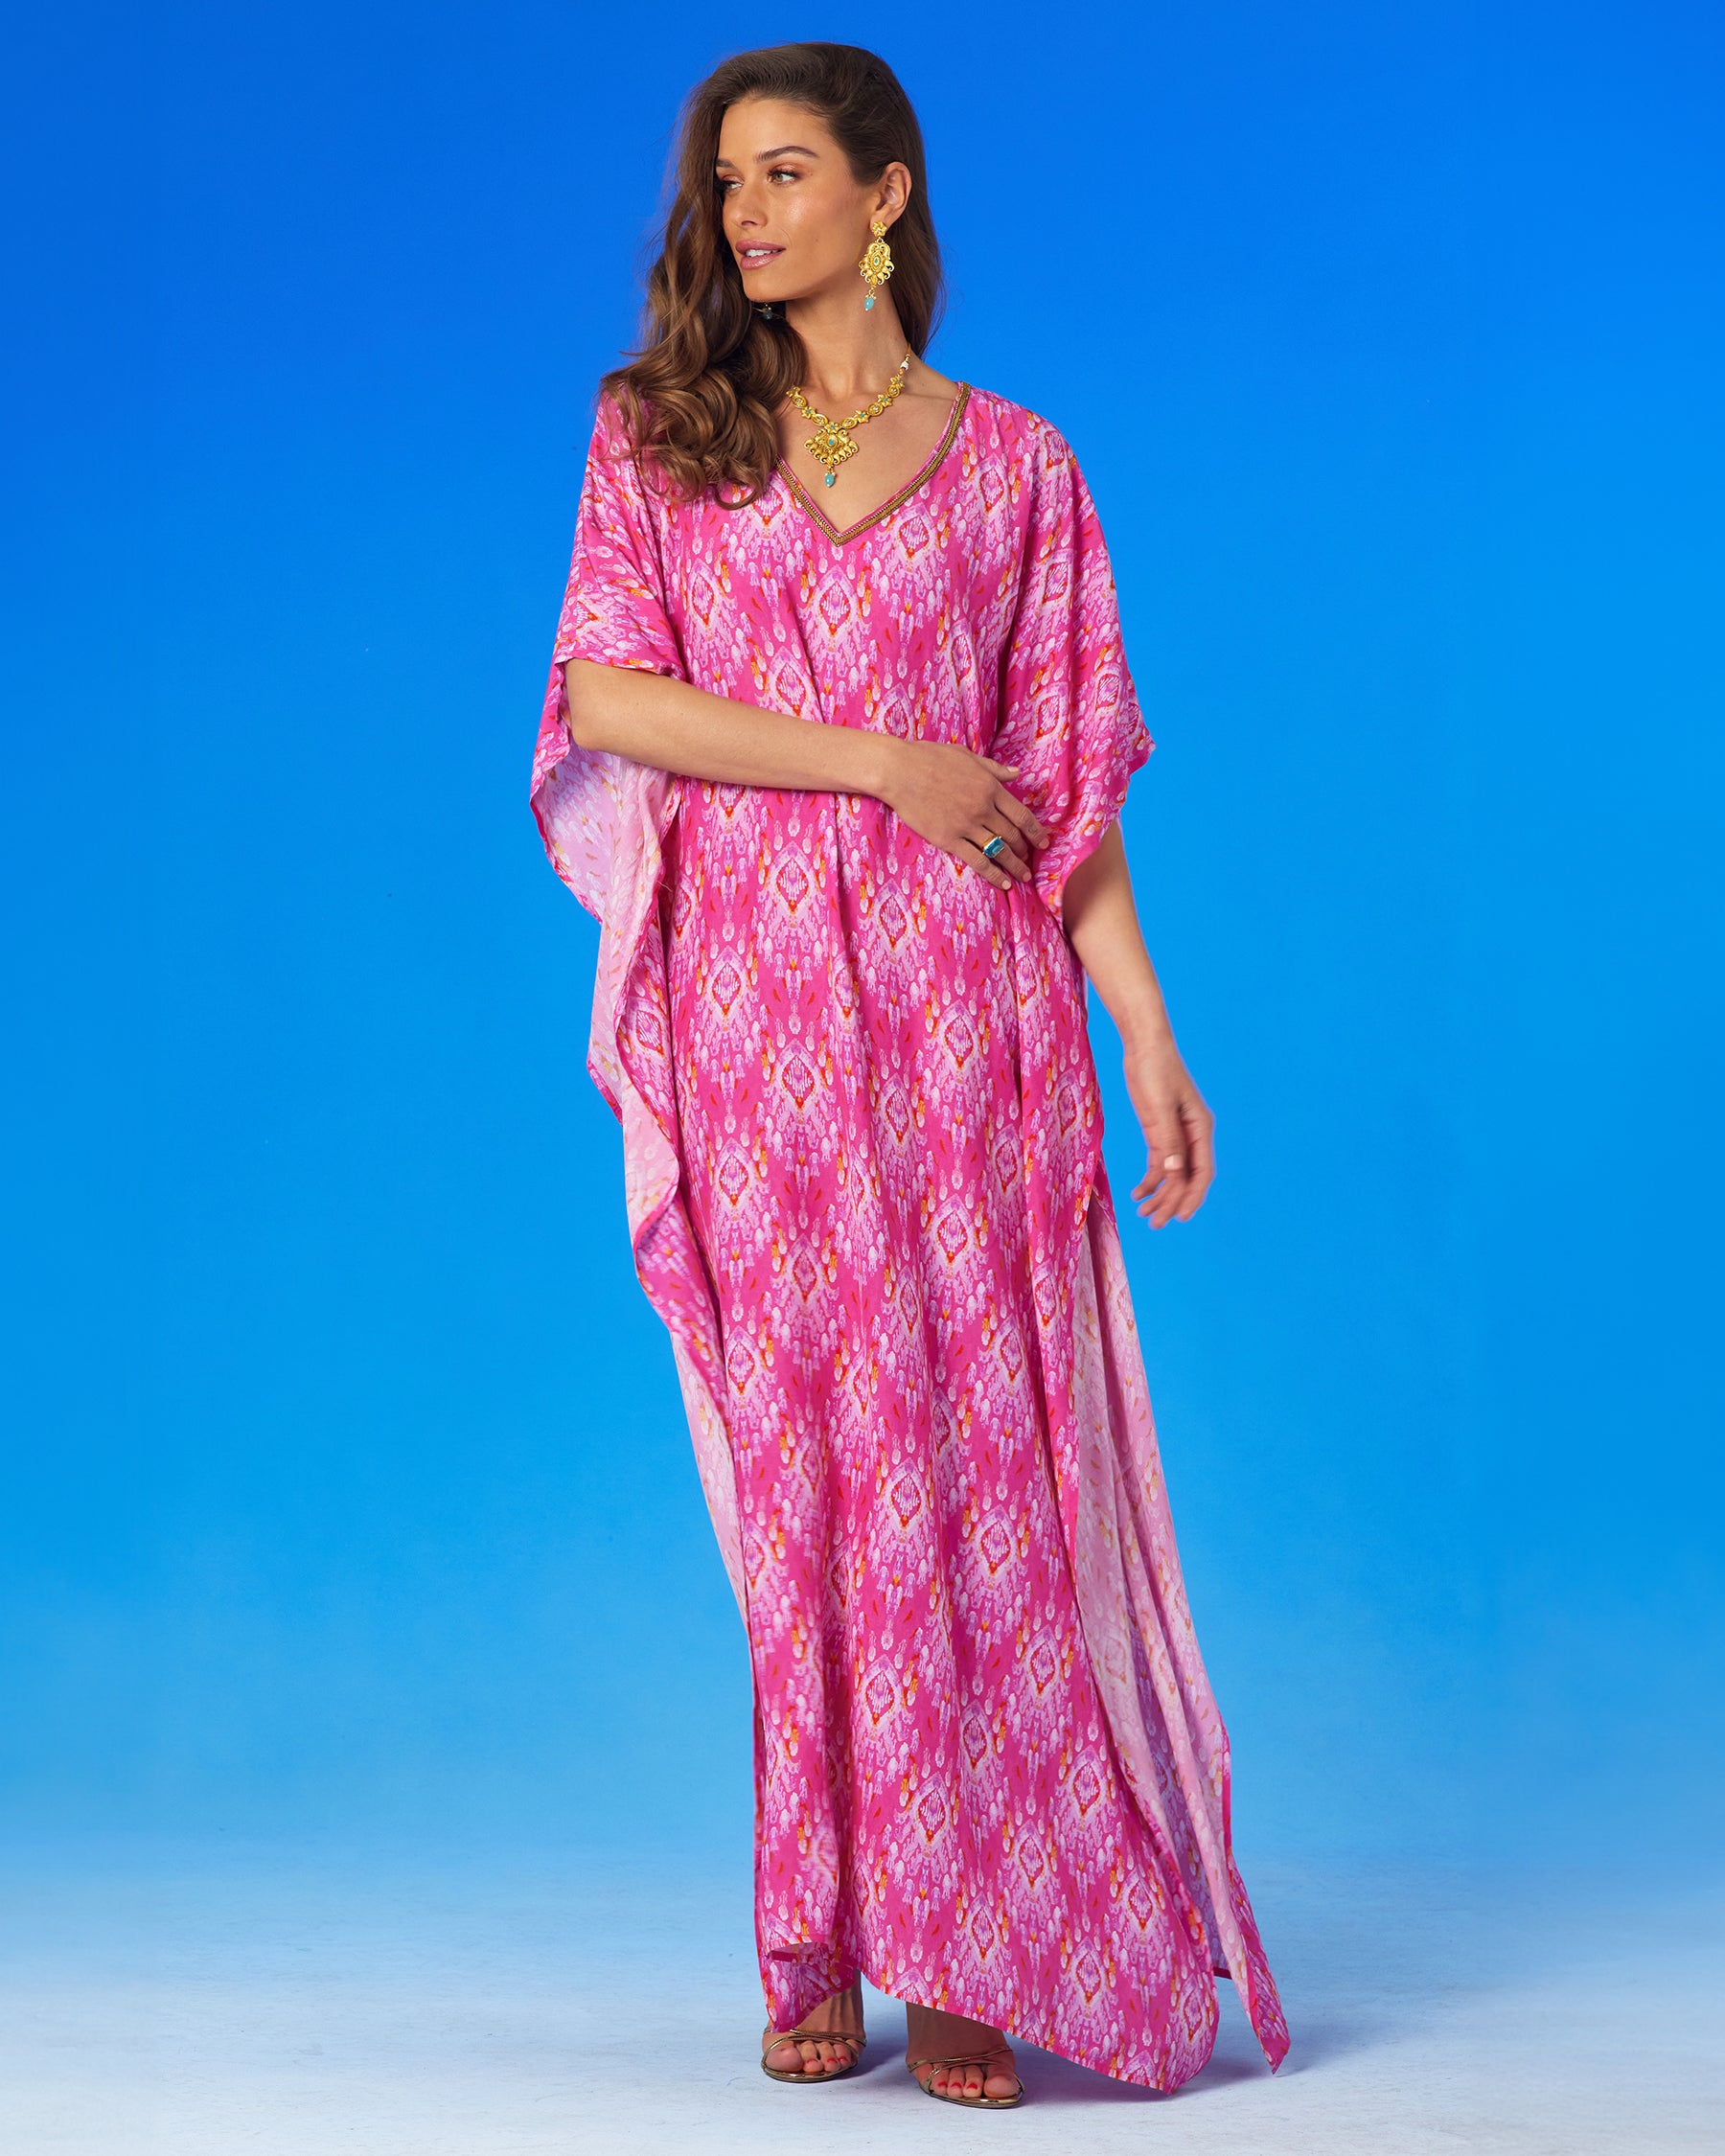 Orchidea Kaftan in Fuchsia Pink Ikat and Gold Beaded Trim full frontal view, woman looking off to the side